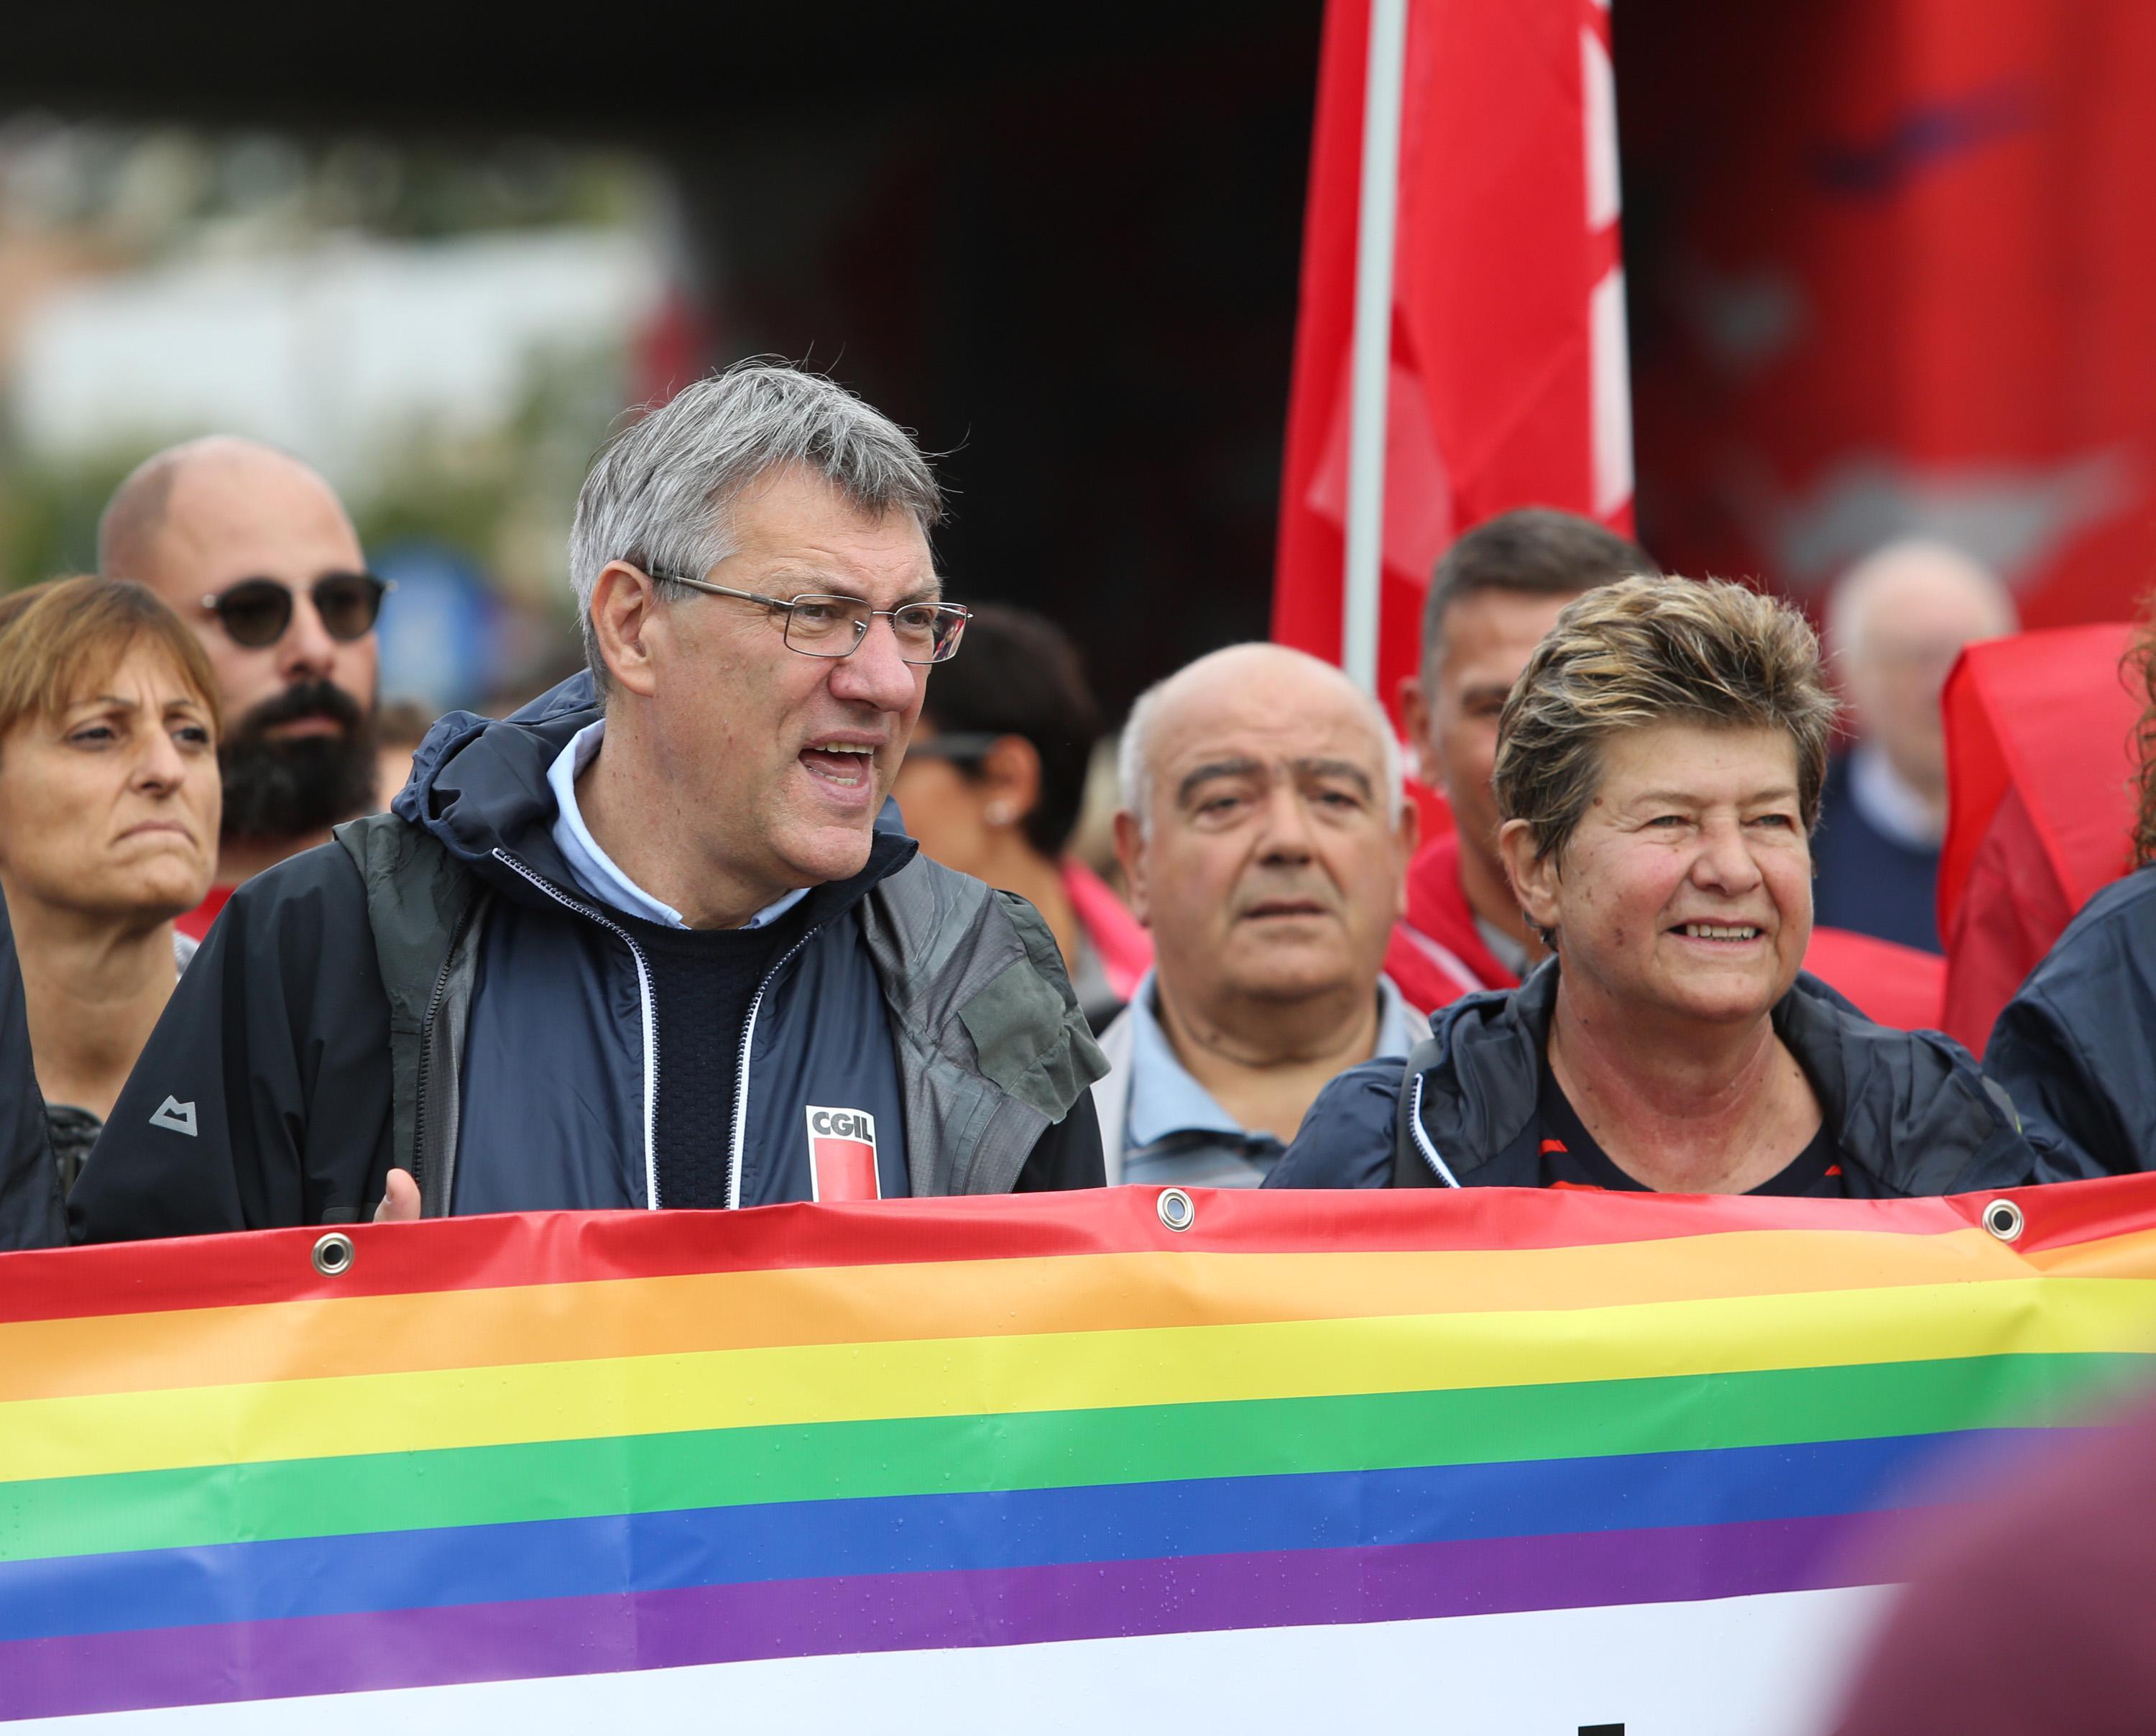 Secretary General of CGIL (Italian General Confederation of Labour) Susanna Camusso (R) with former Secretary General of FIOM-CGIL (Metallurgical Workers Employees Federation), Maurizio Landini (L), take part at the ?March for Peace? from Perugia to Assisi, Italy, 07 October 2018.
ANSA/MATTEO CROCCHIONI